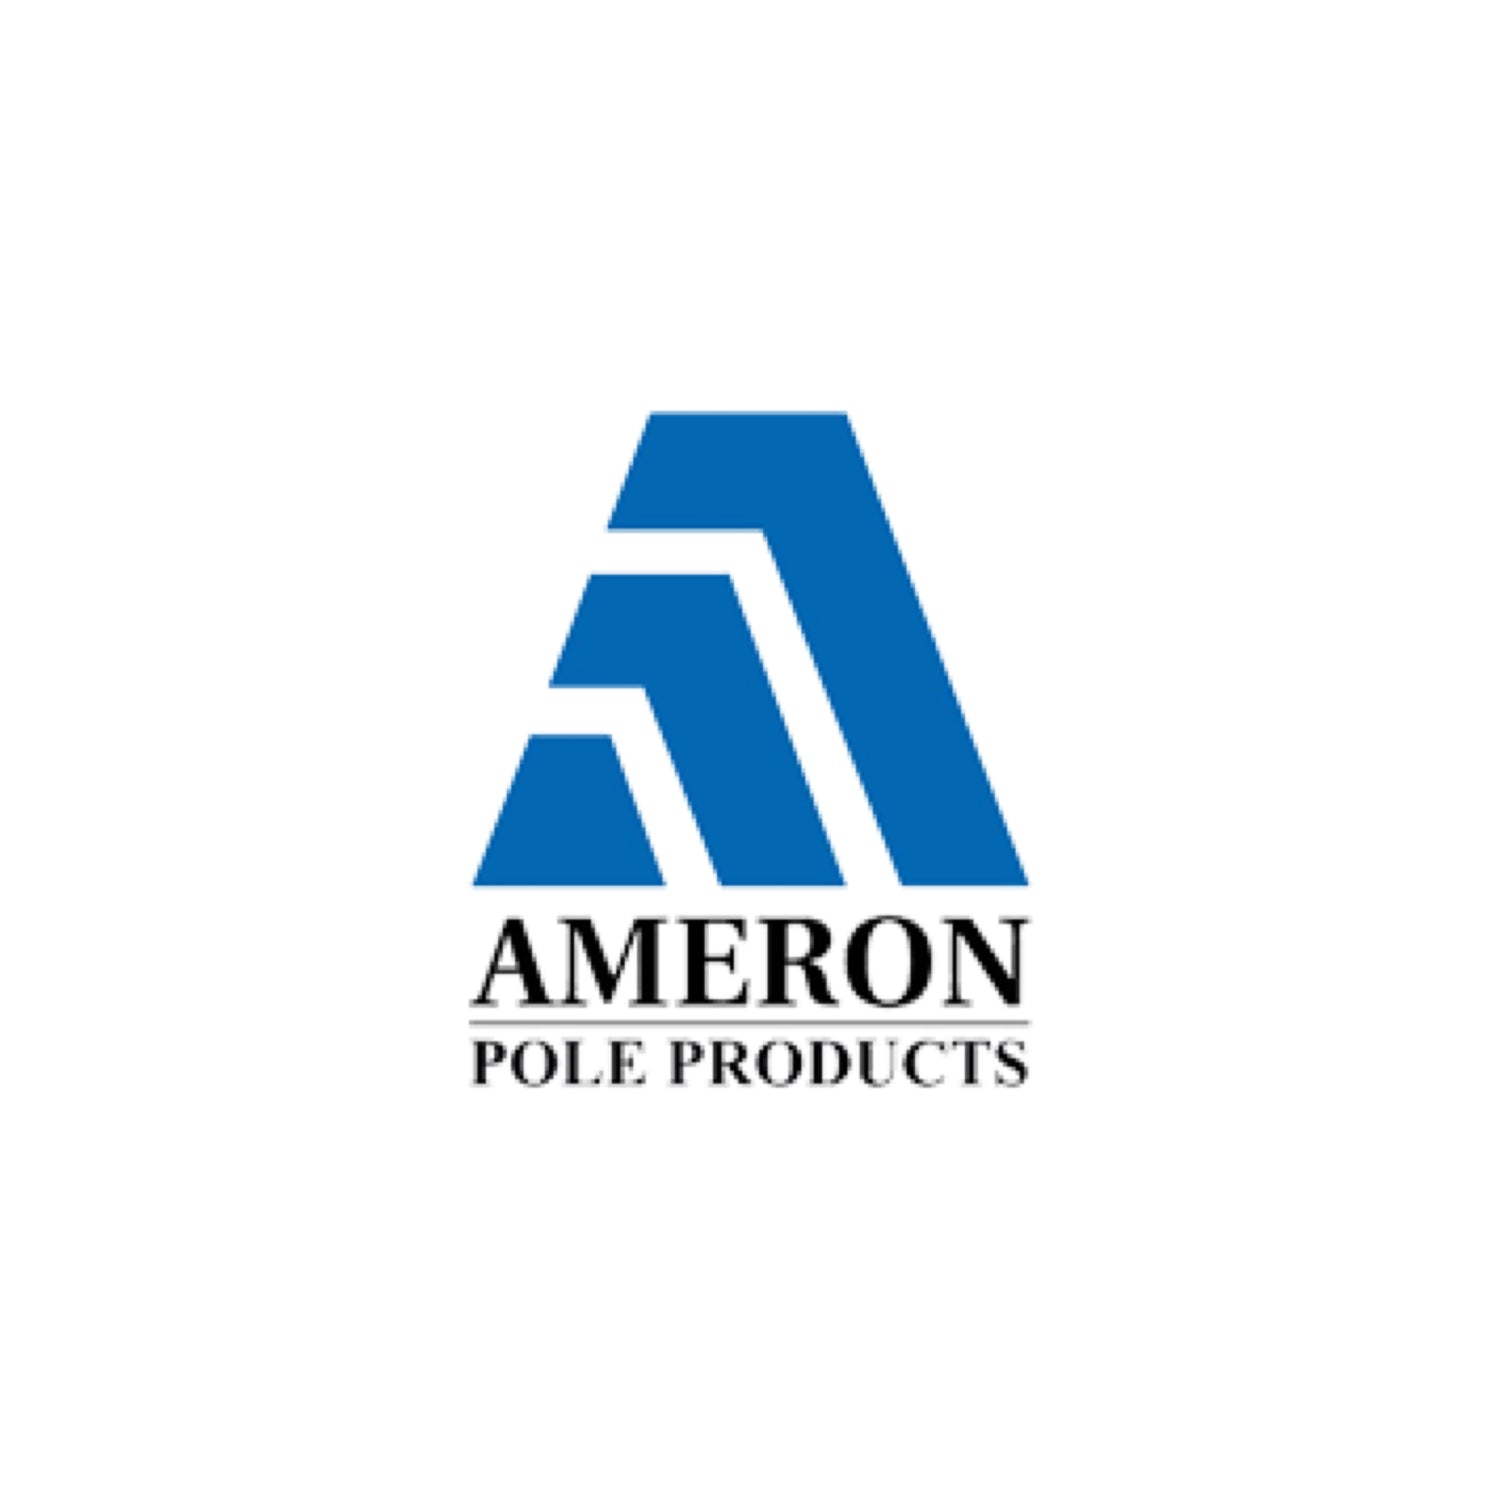 AMERON POLE PRODUCTS DIVISION